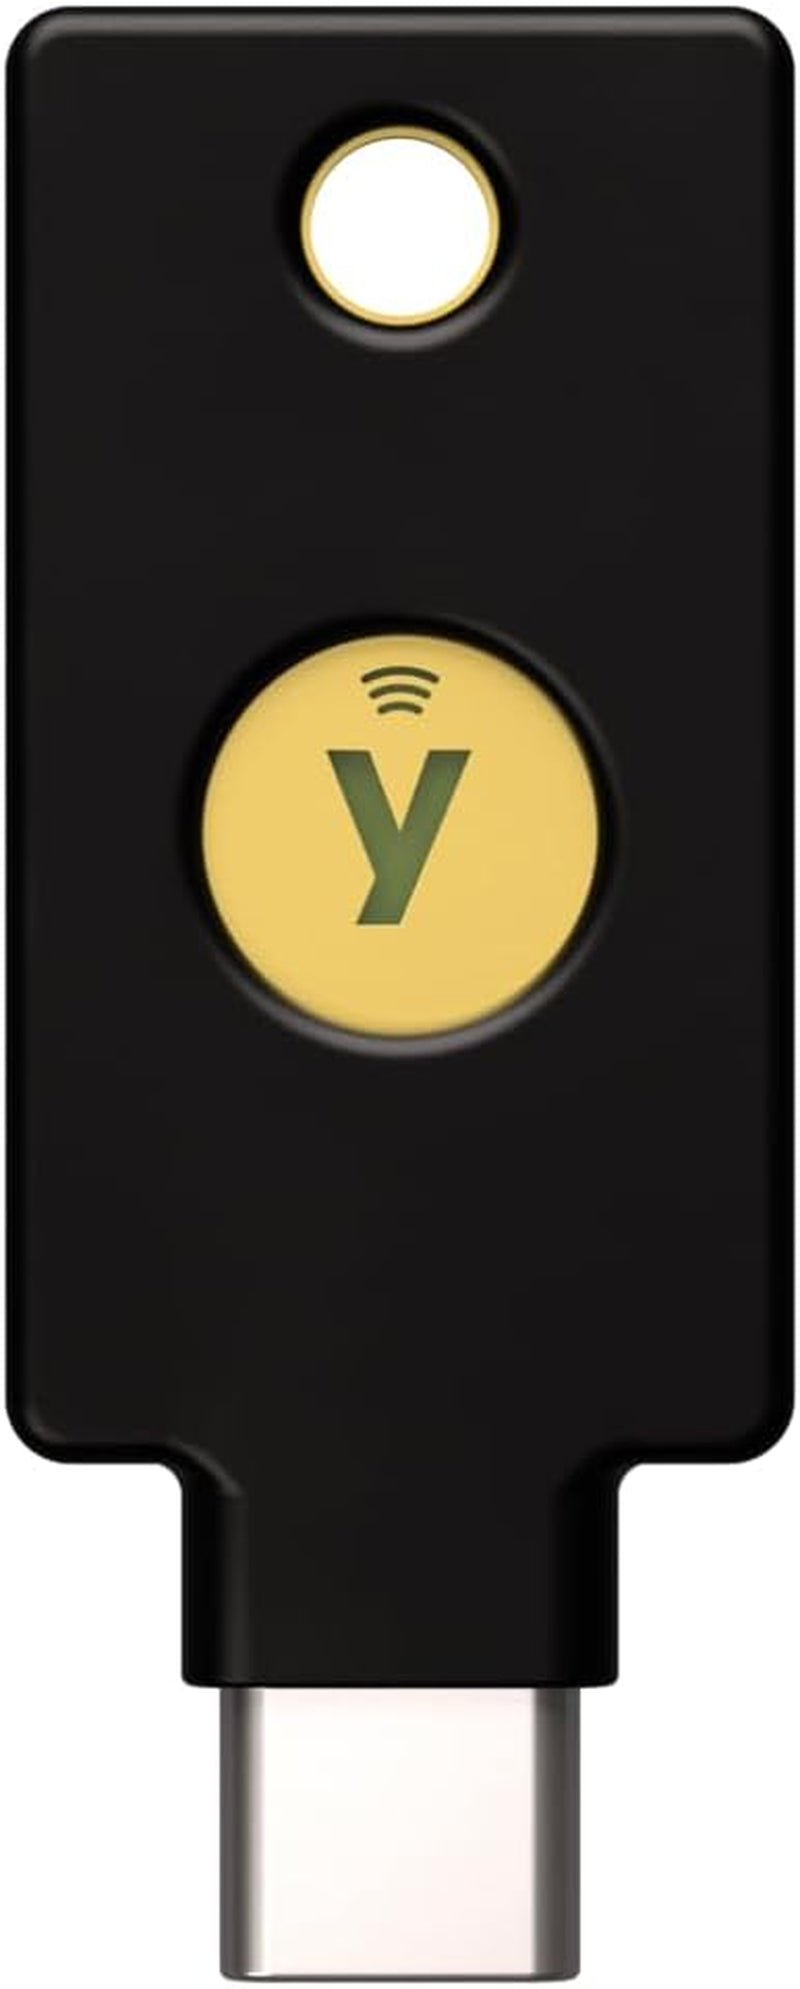 - Yubikey 5C NFC - Two-Factor Authentication (2FA) Security Key, Connect via USB-C or NFC, FIDO Certified - Protect Your Online Accounts